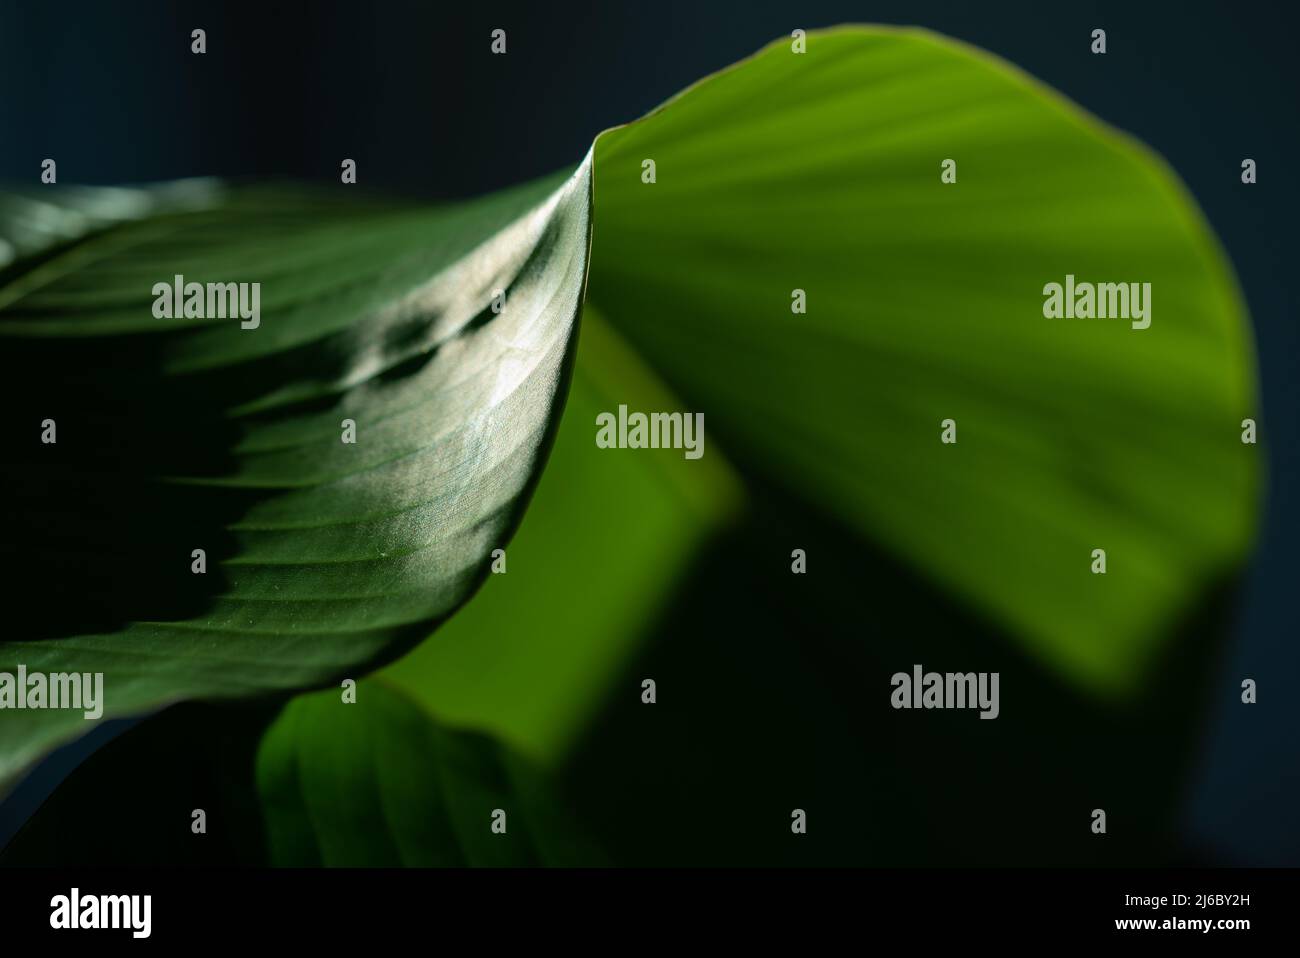 Banana leaves in strong backlight making abstract forms and patterns Stock Photo